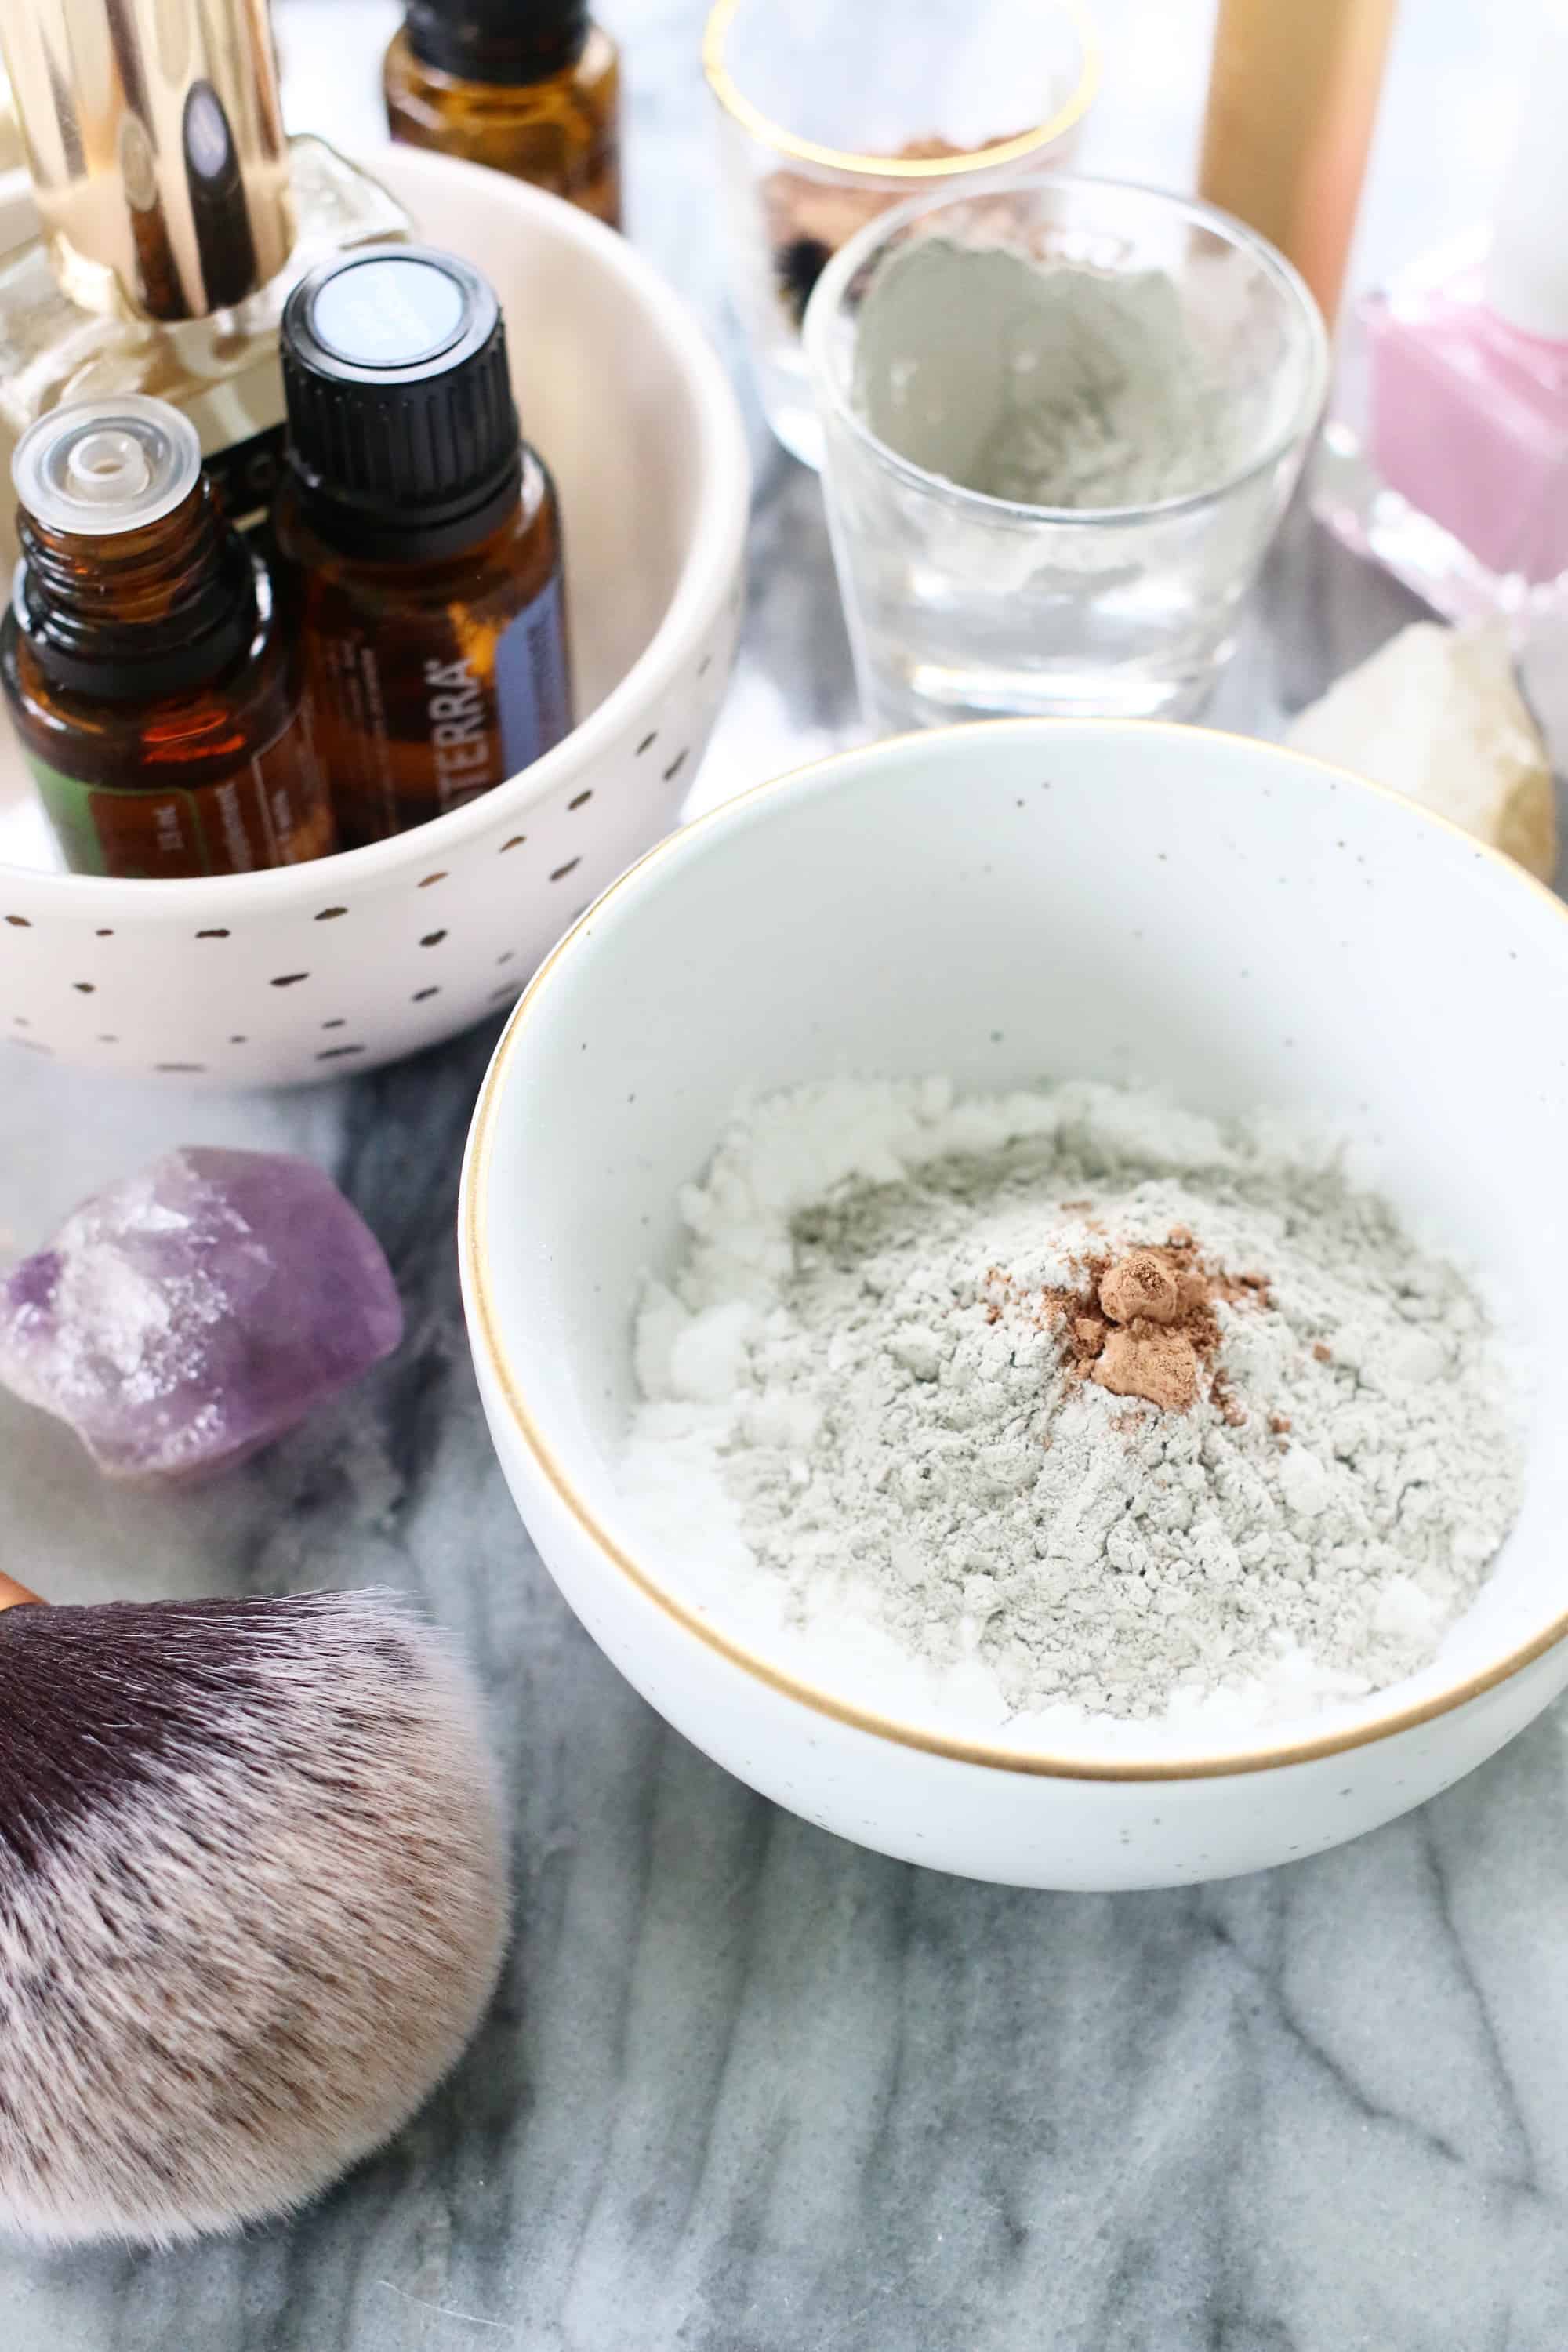 Make Your Own Nontoxic Dry Shampoo! - A Beautiful Mess | Haarshampoos